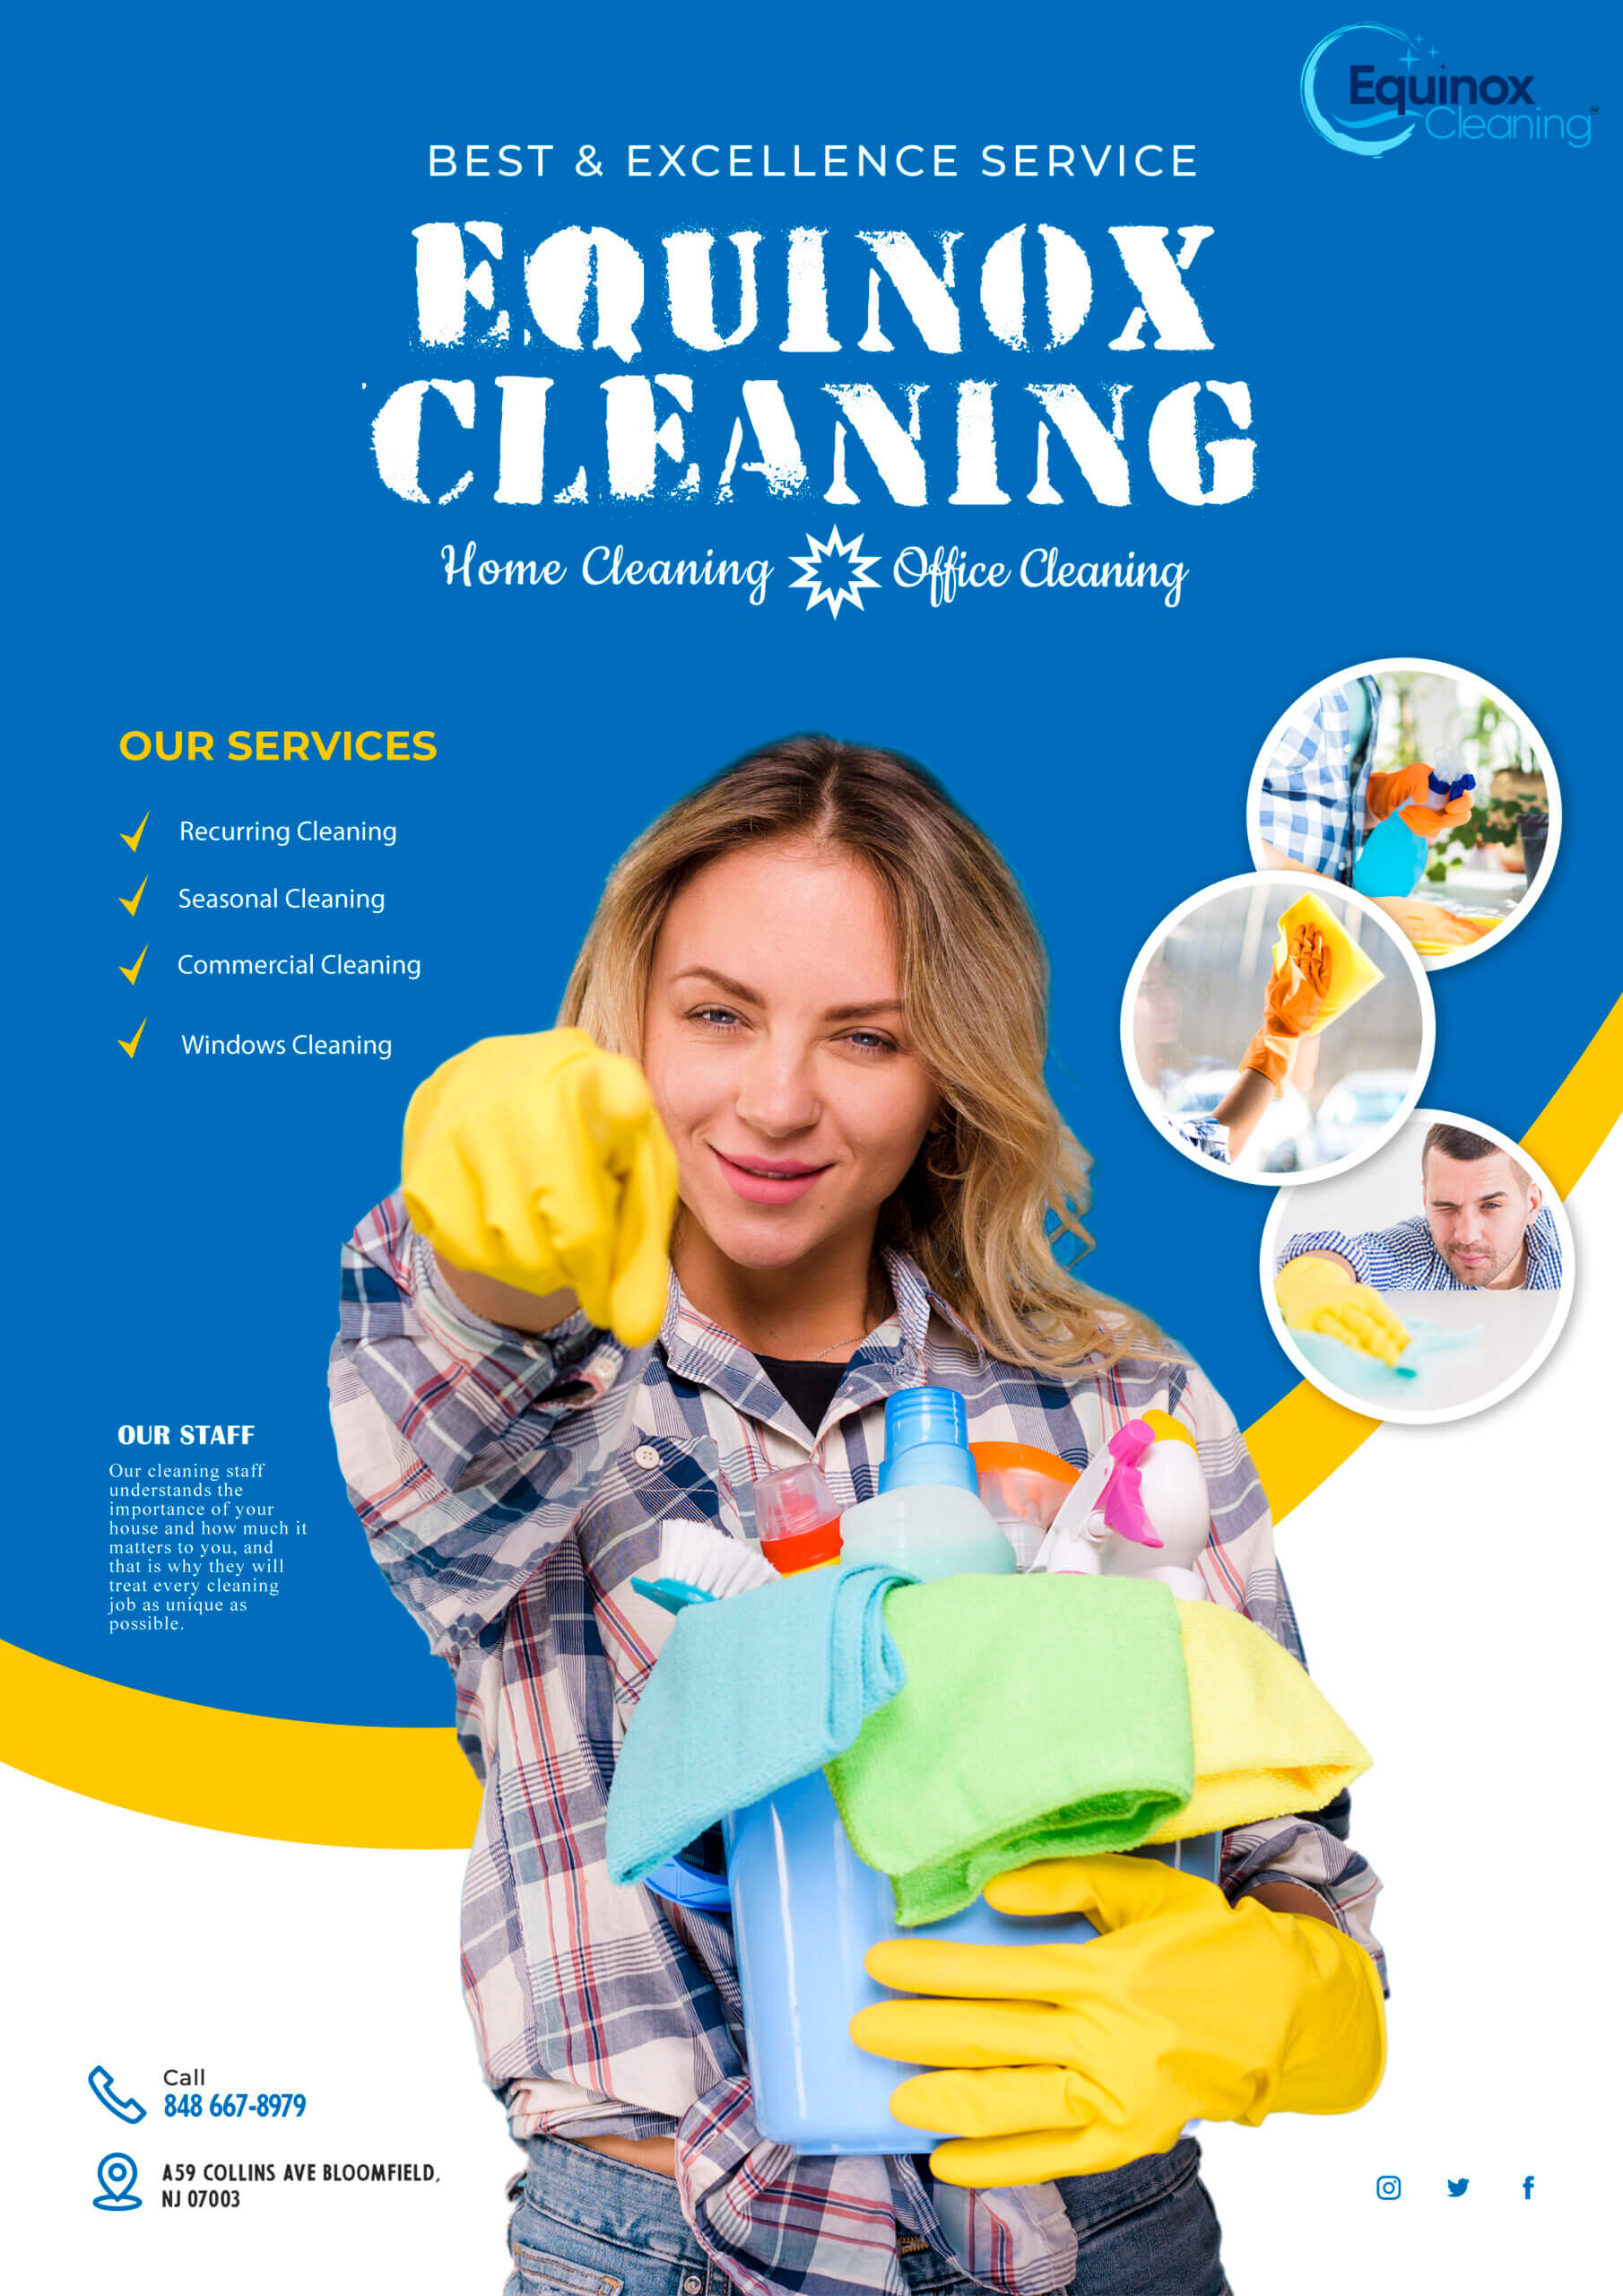 Equinox cleaning Services - Professional Cleaning Service in New Jersey